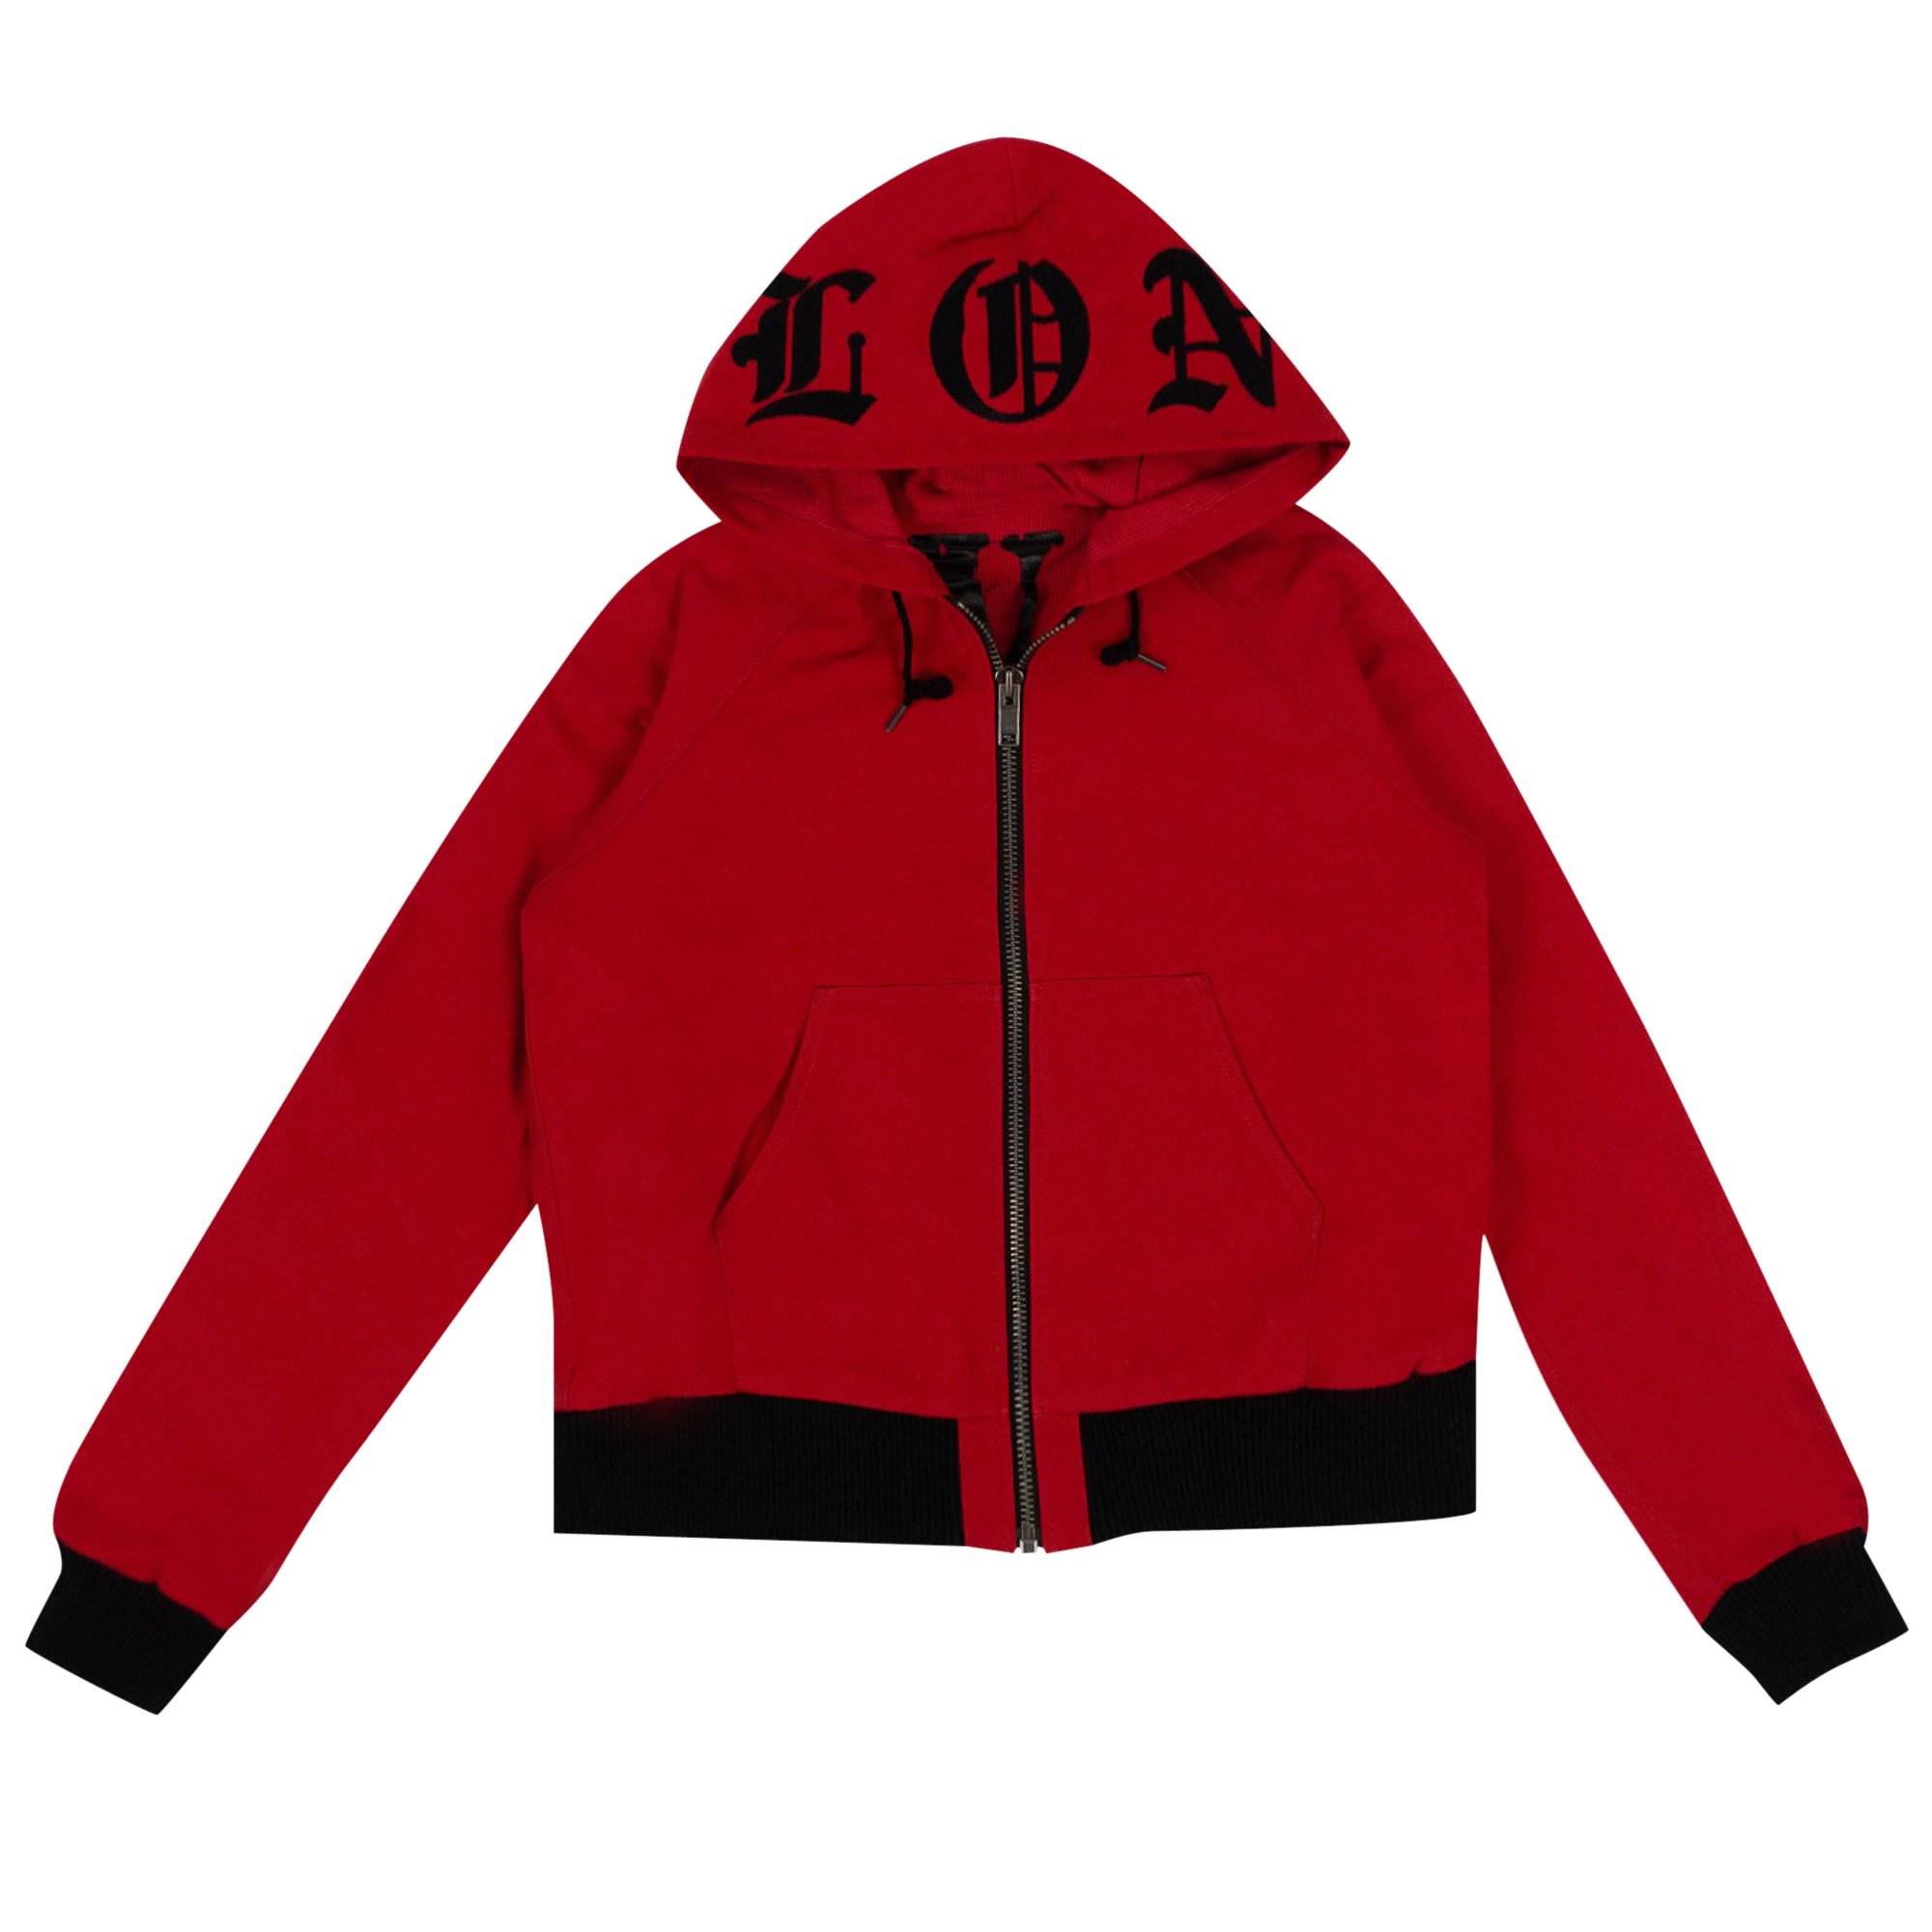 Buy Vlone Canvas Hoodie 'Red' - VLONE O 3 RED | GOAT